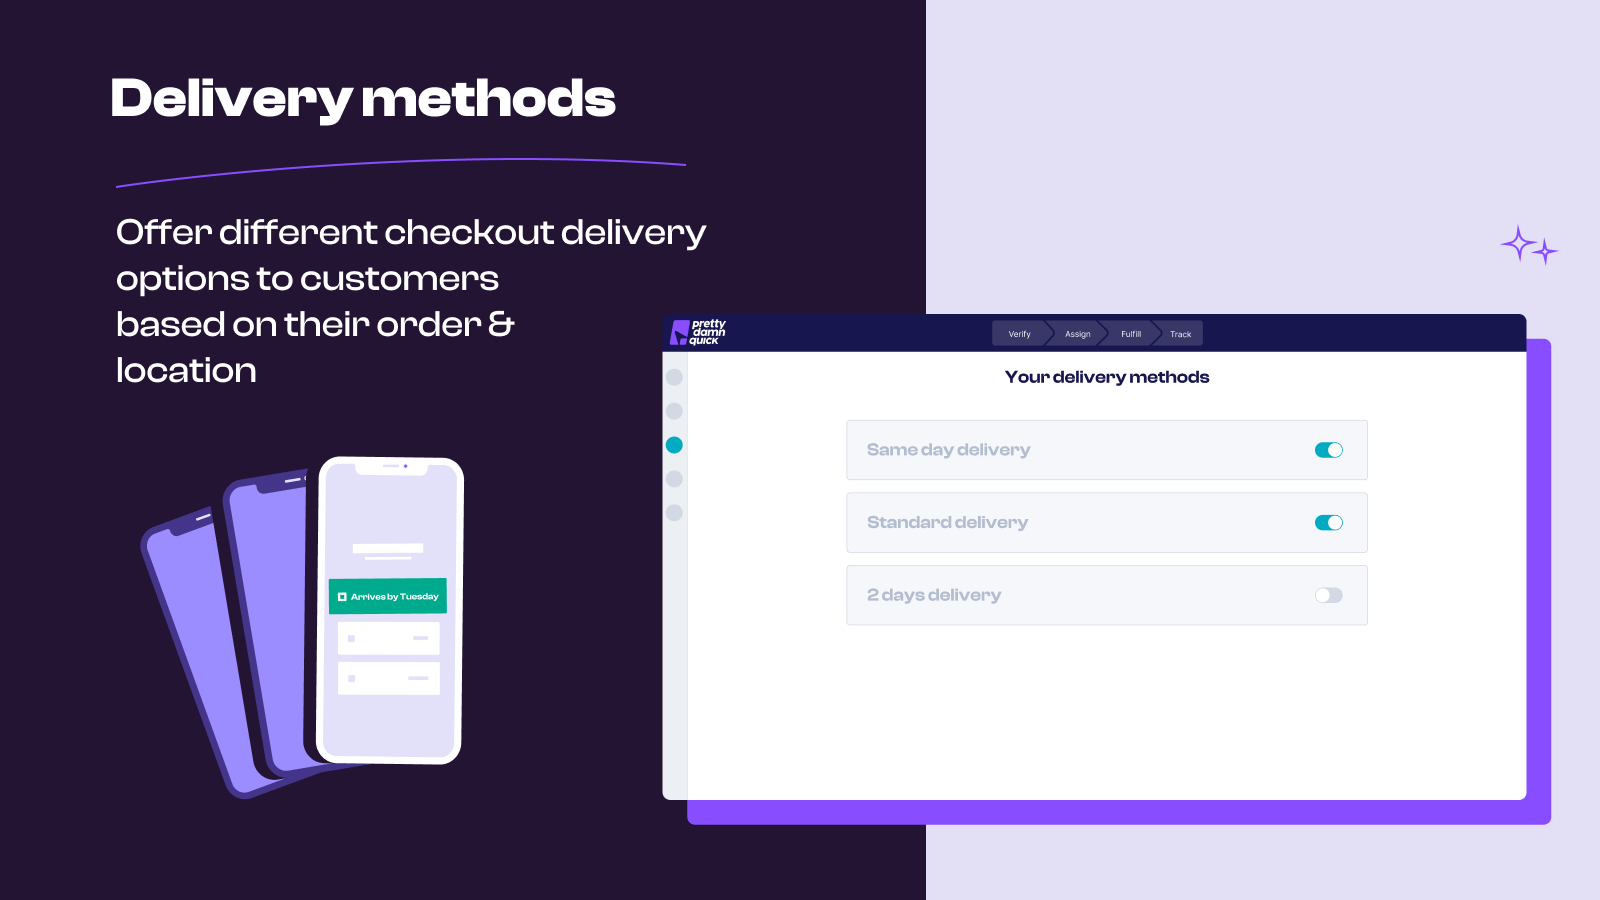 Add delivery methods to checkout